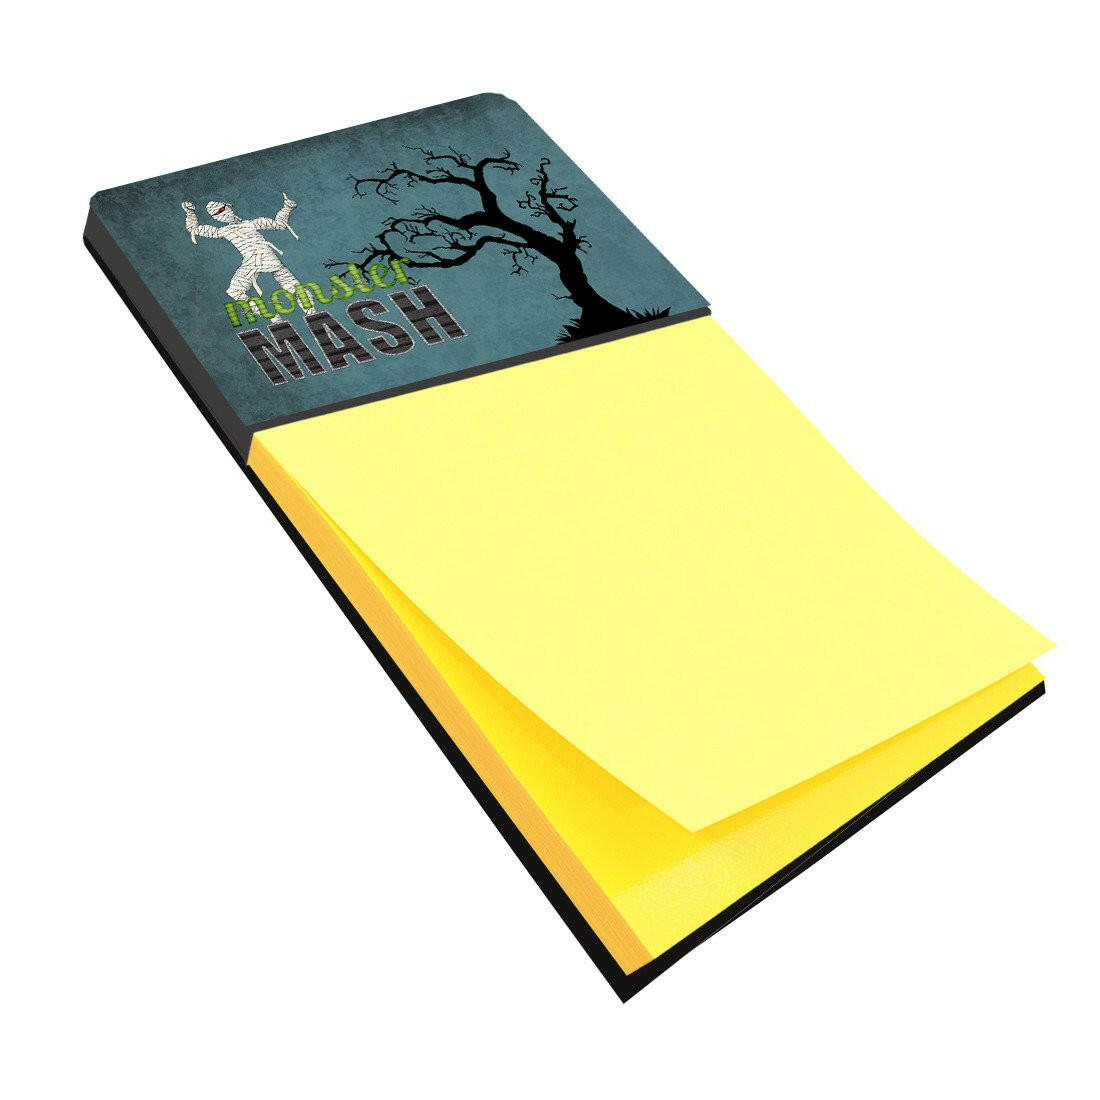 Monster Mash with Mummy Halloween Refiillable Sticky Note Holder or Postit Note Dispenser SB3019SN by Caroline's Treasures